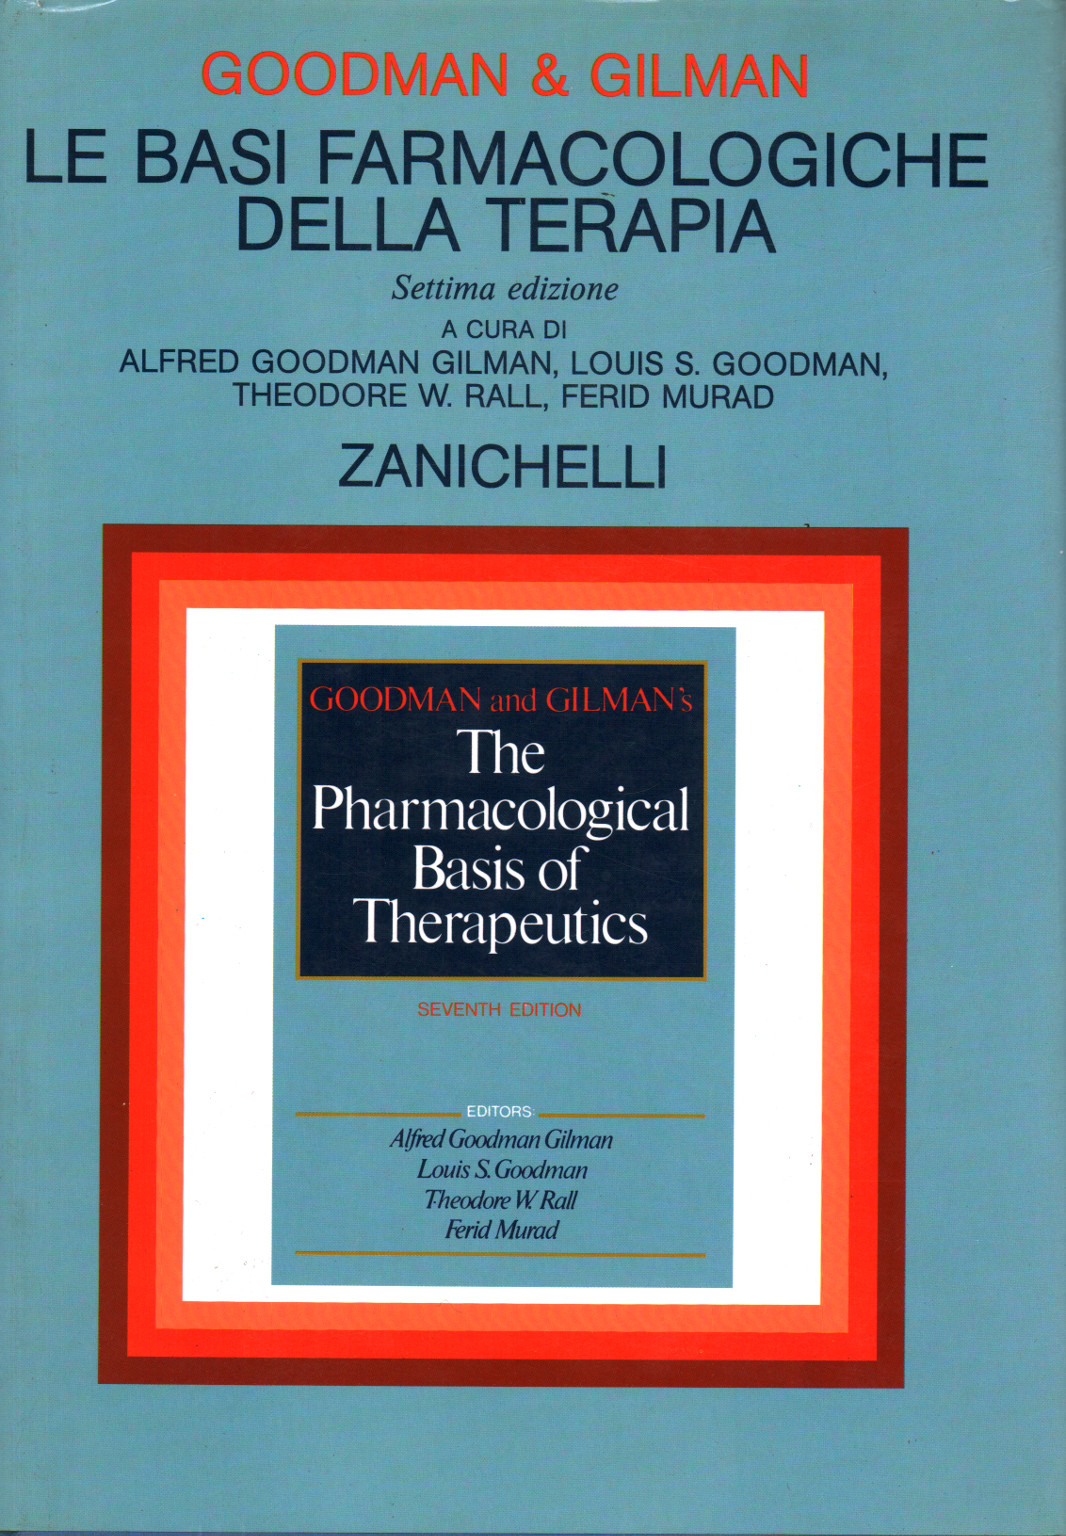 The basics of pharmacological therapy, s.a.